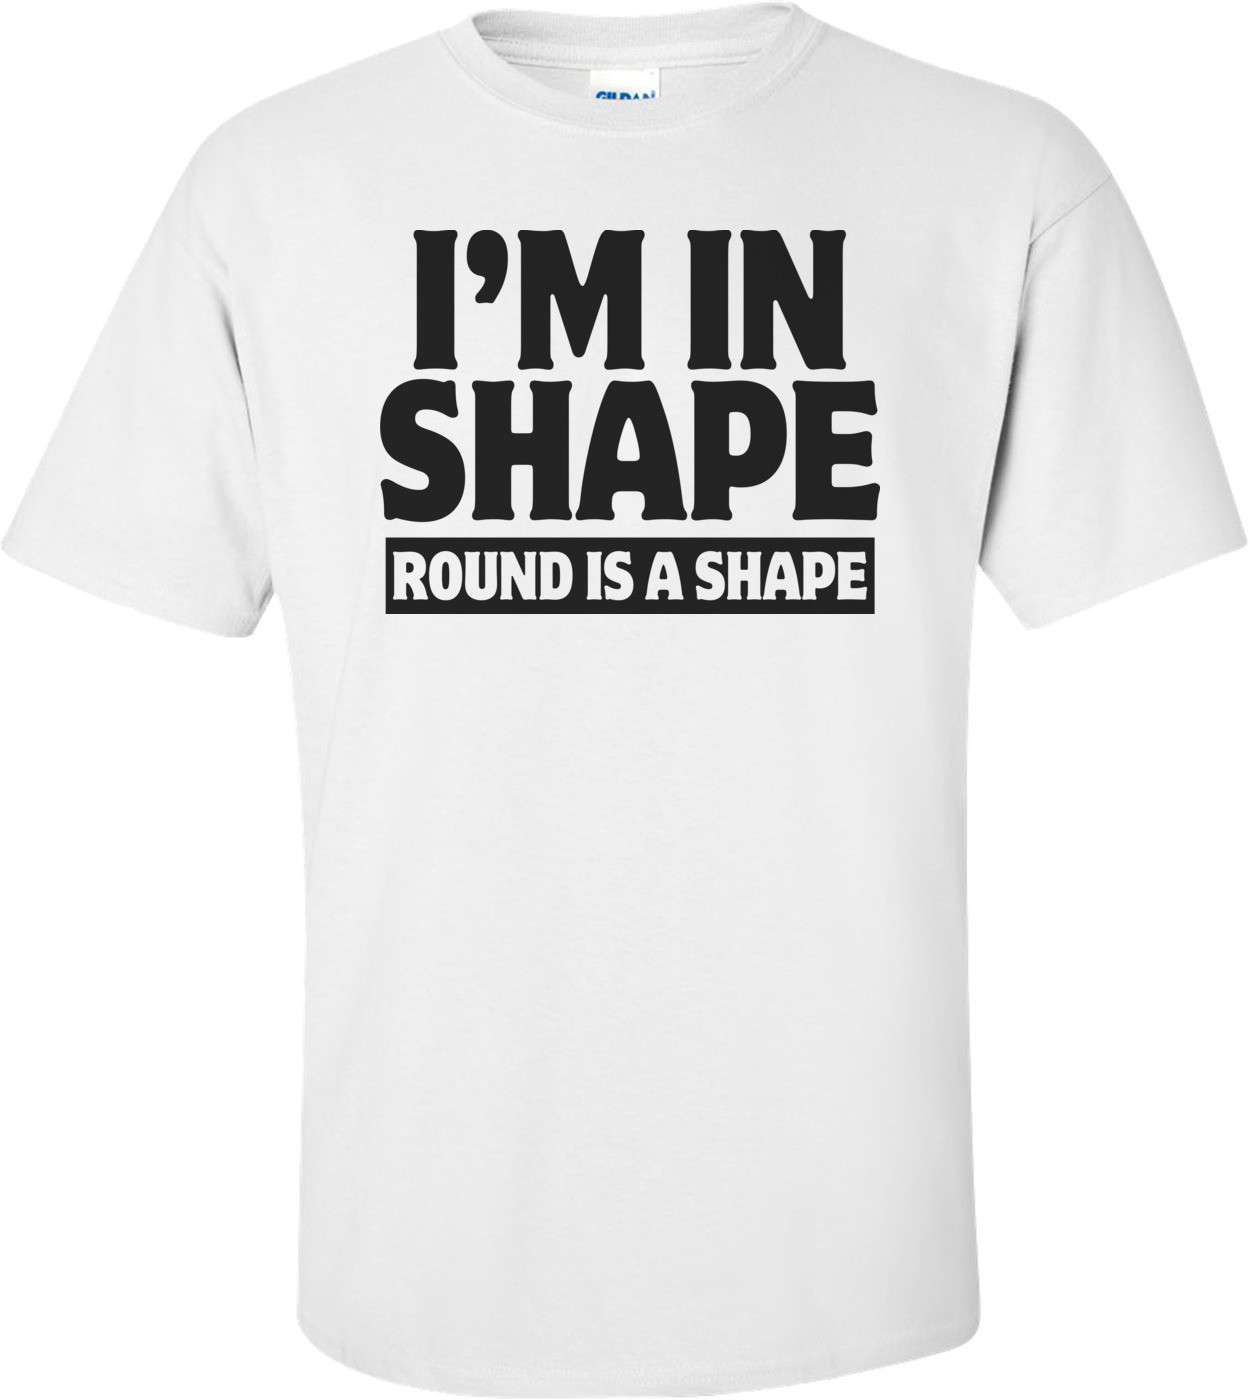 I'm In Shape - Round Is A Shape Funny Shirt